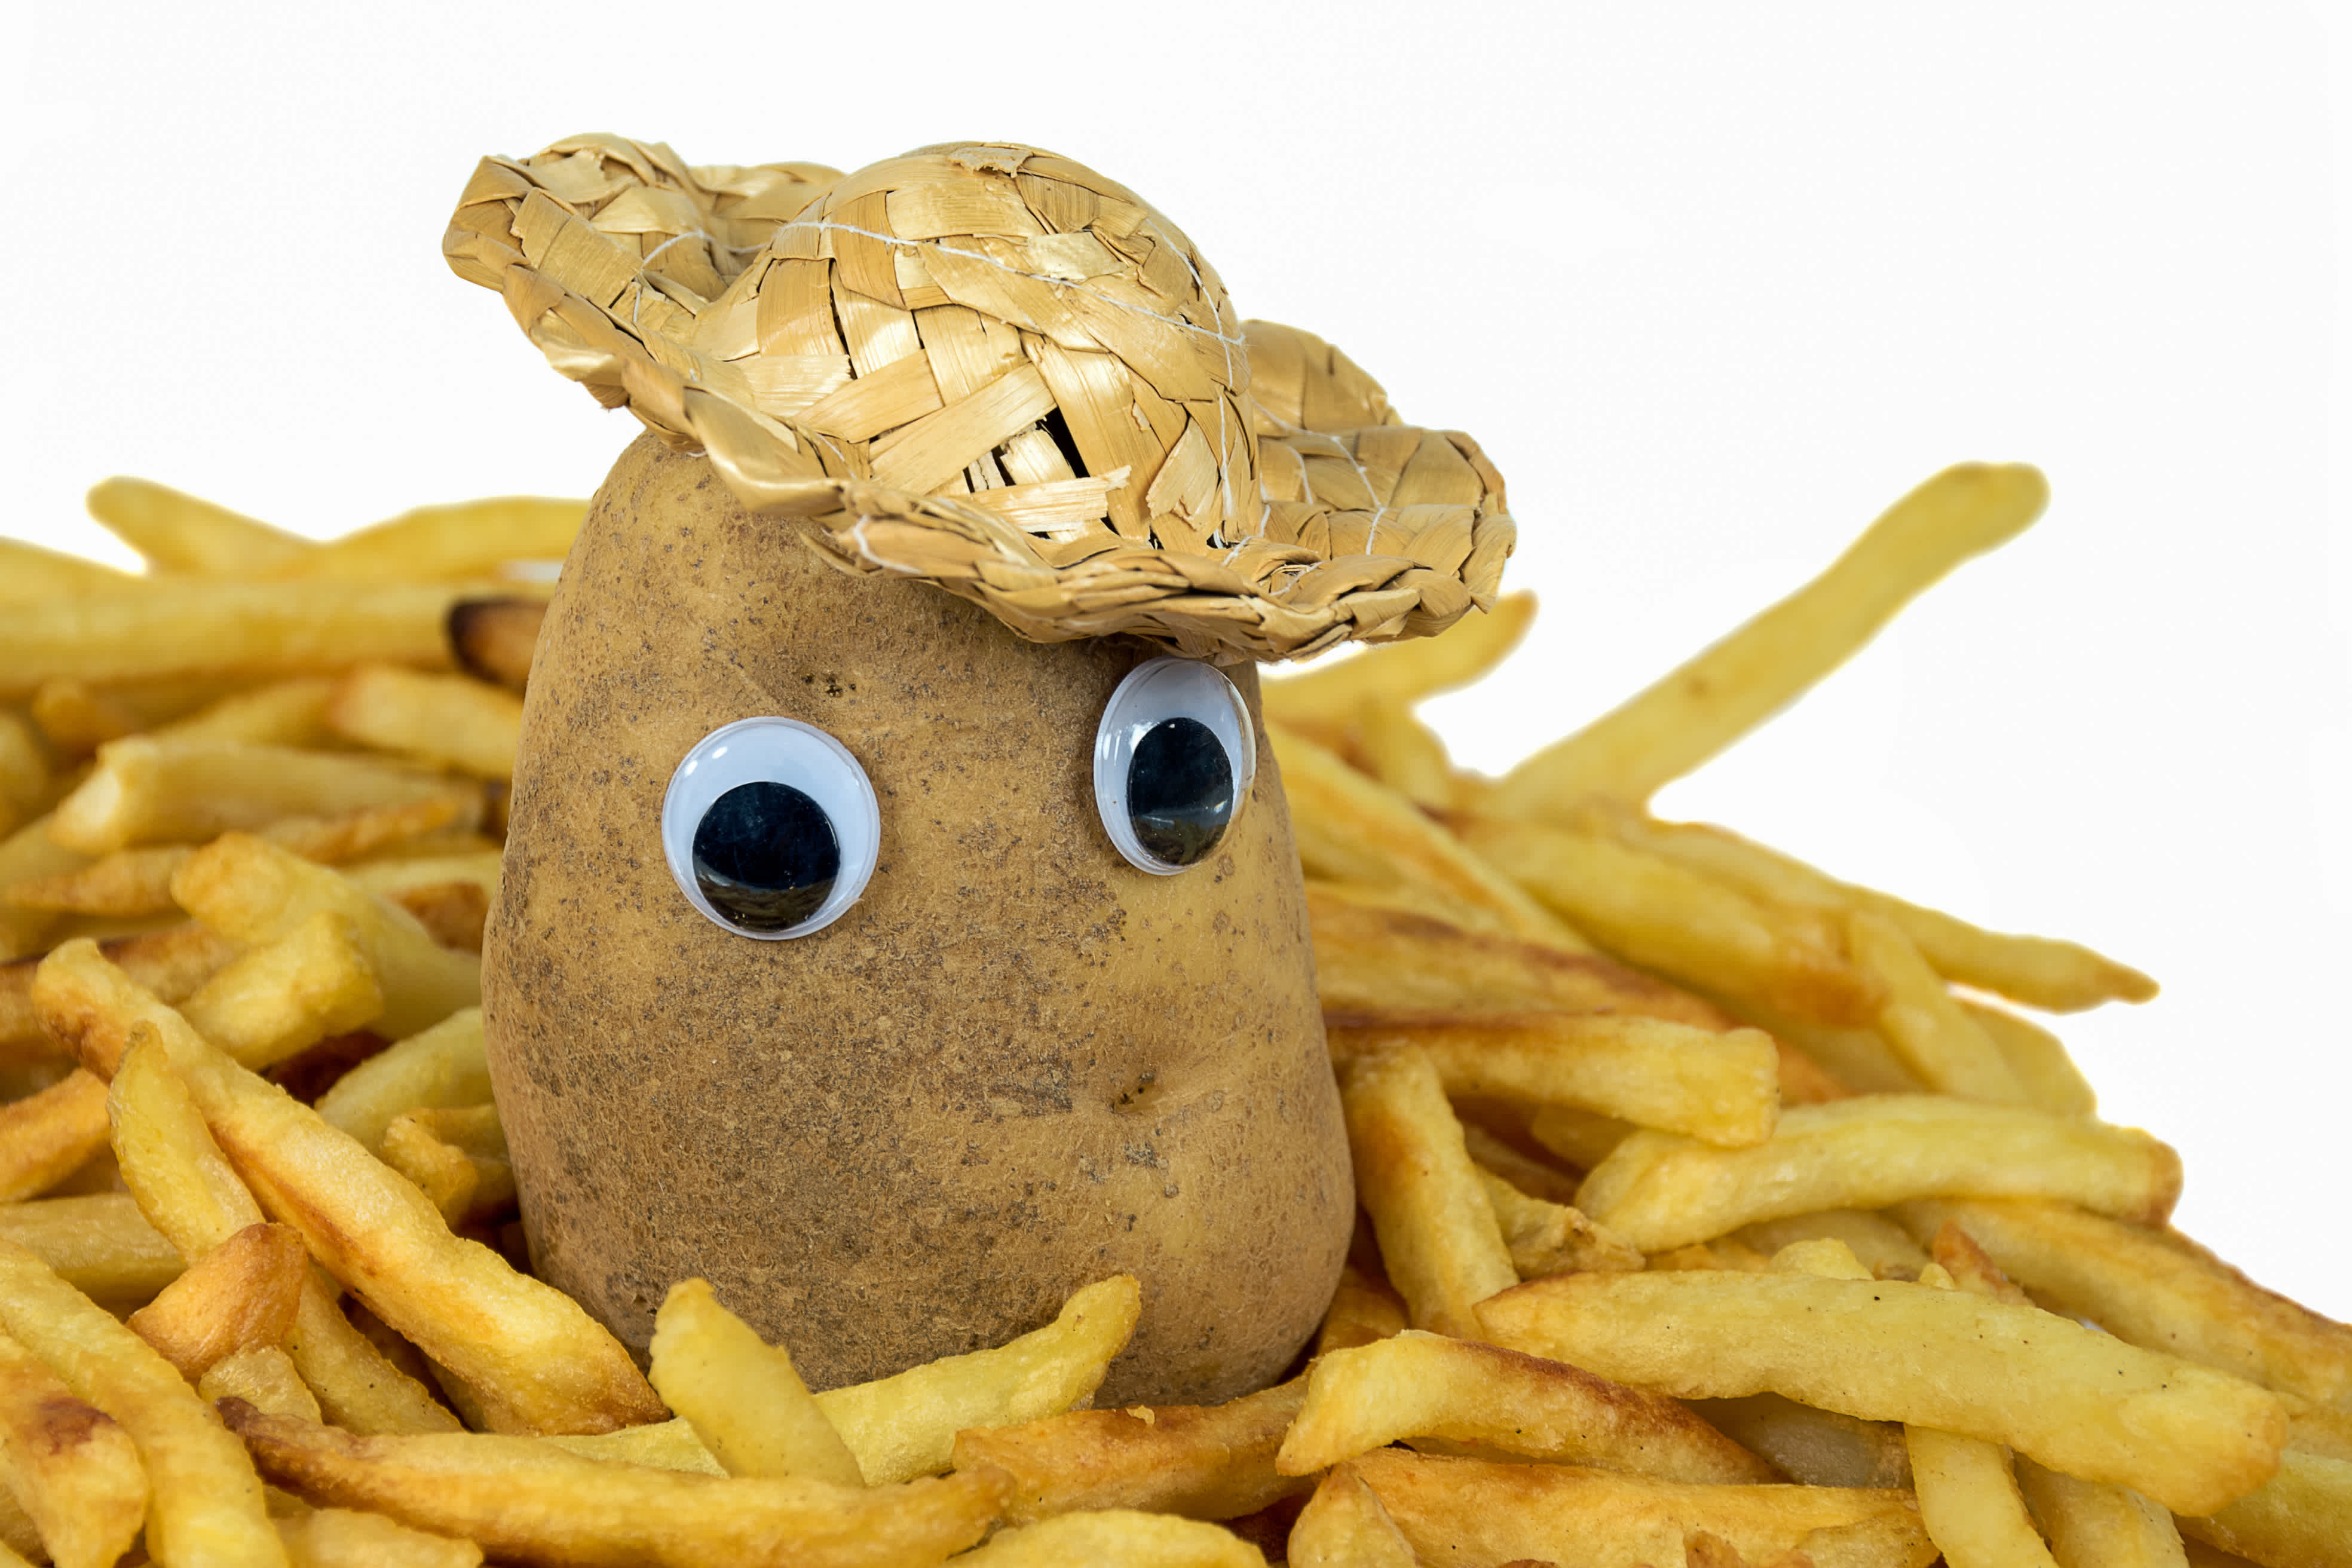 This is a cute depiction of a potato with googly eyes to illustrate potato vision.